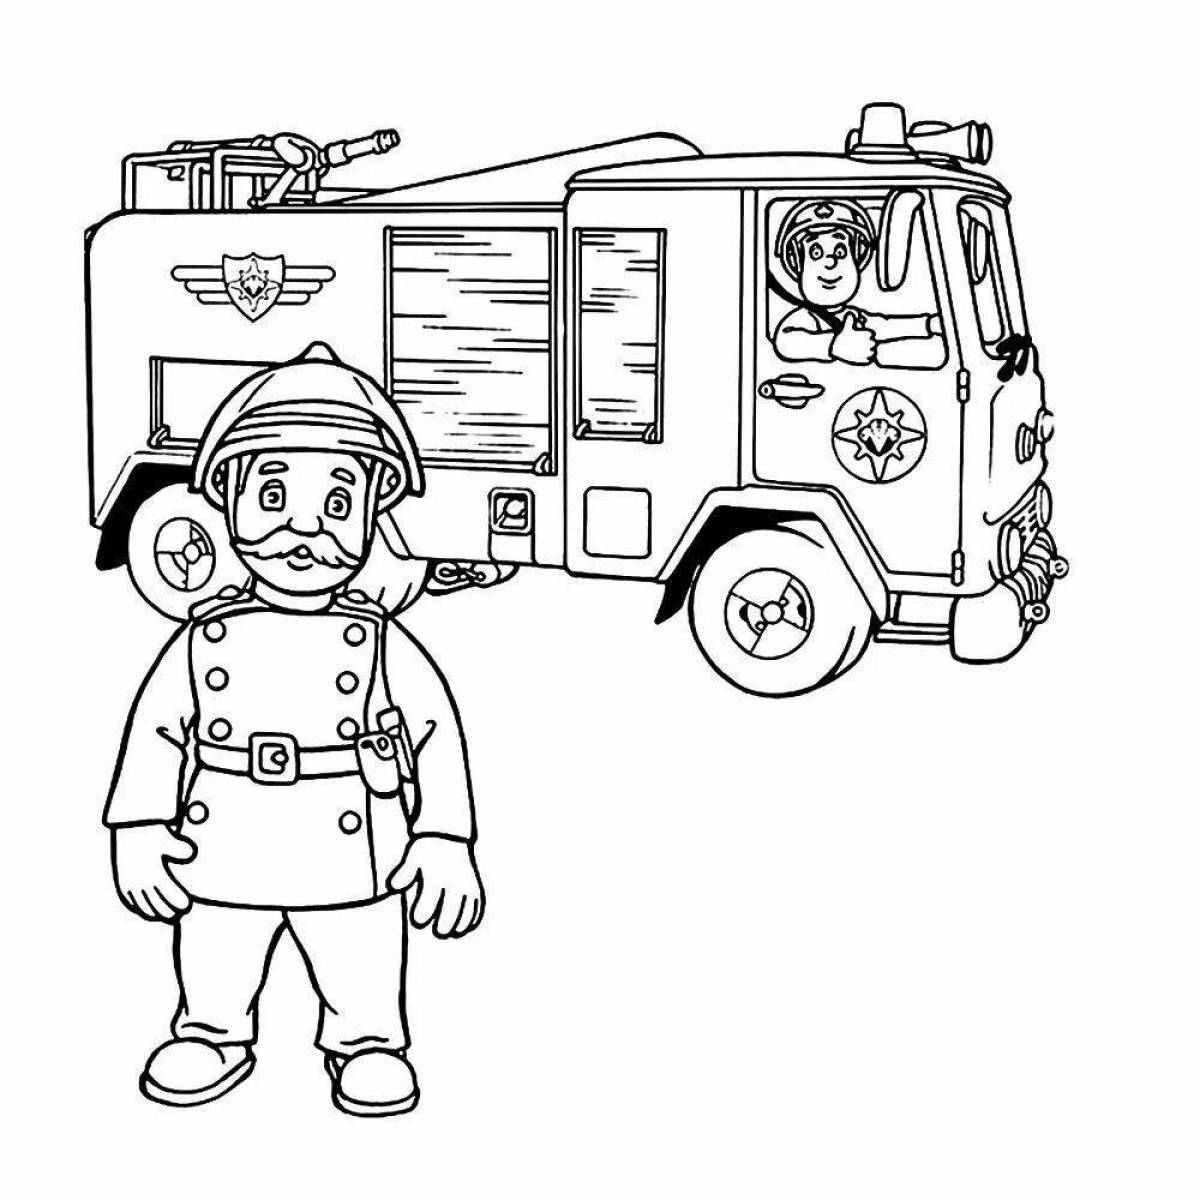 Animated emergency coloring book